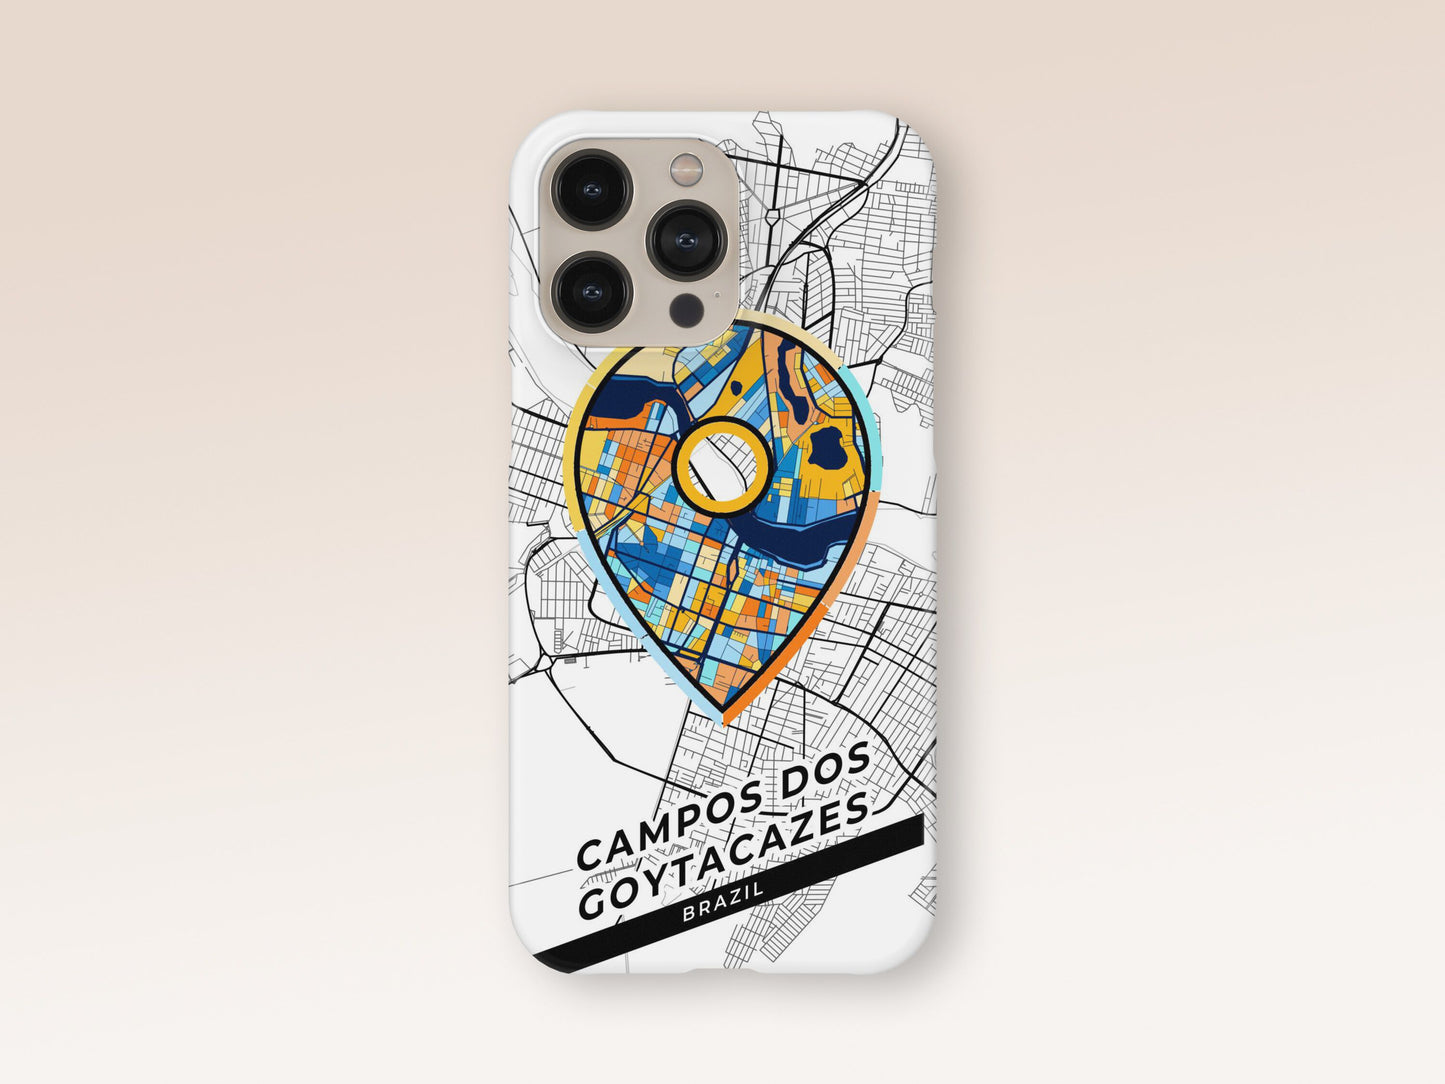 Campos Dos Goytacazes Brazil slim phone case with colorful icon. Birthday, wedding or housewarming gift. Couple match cases. 1